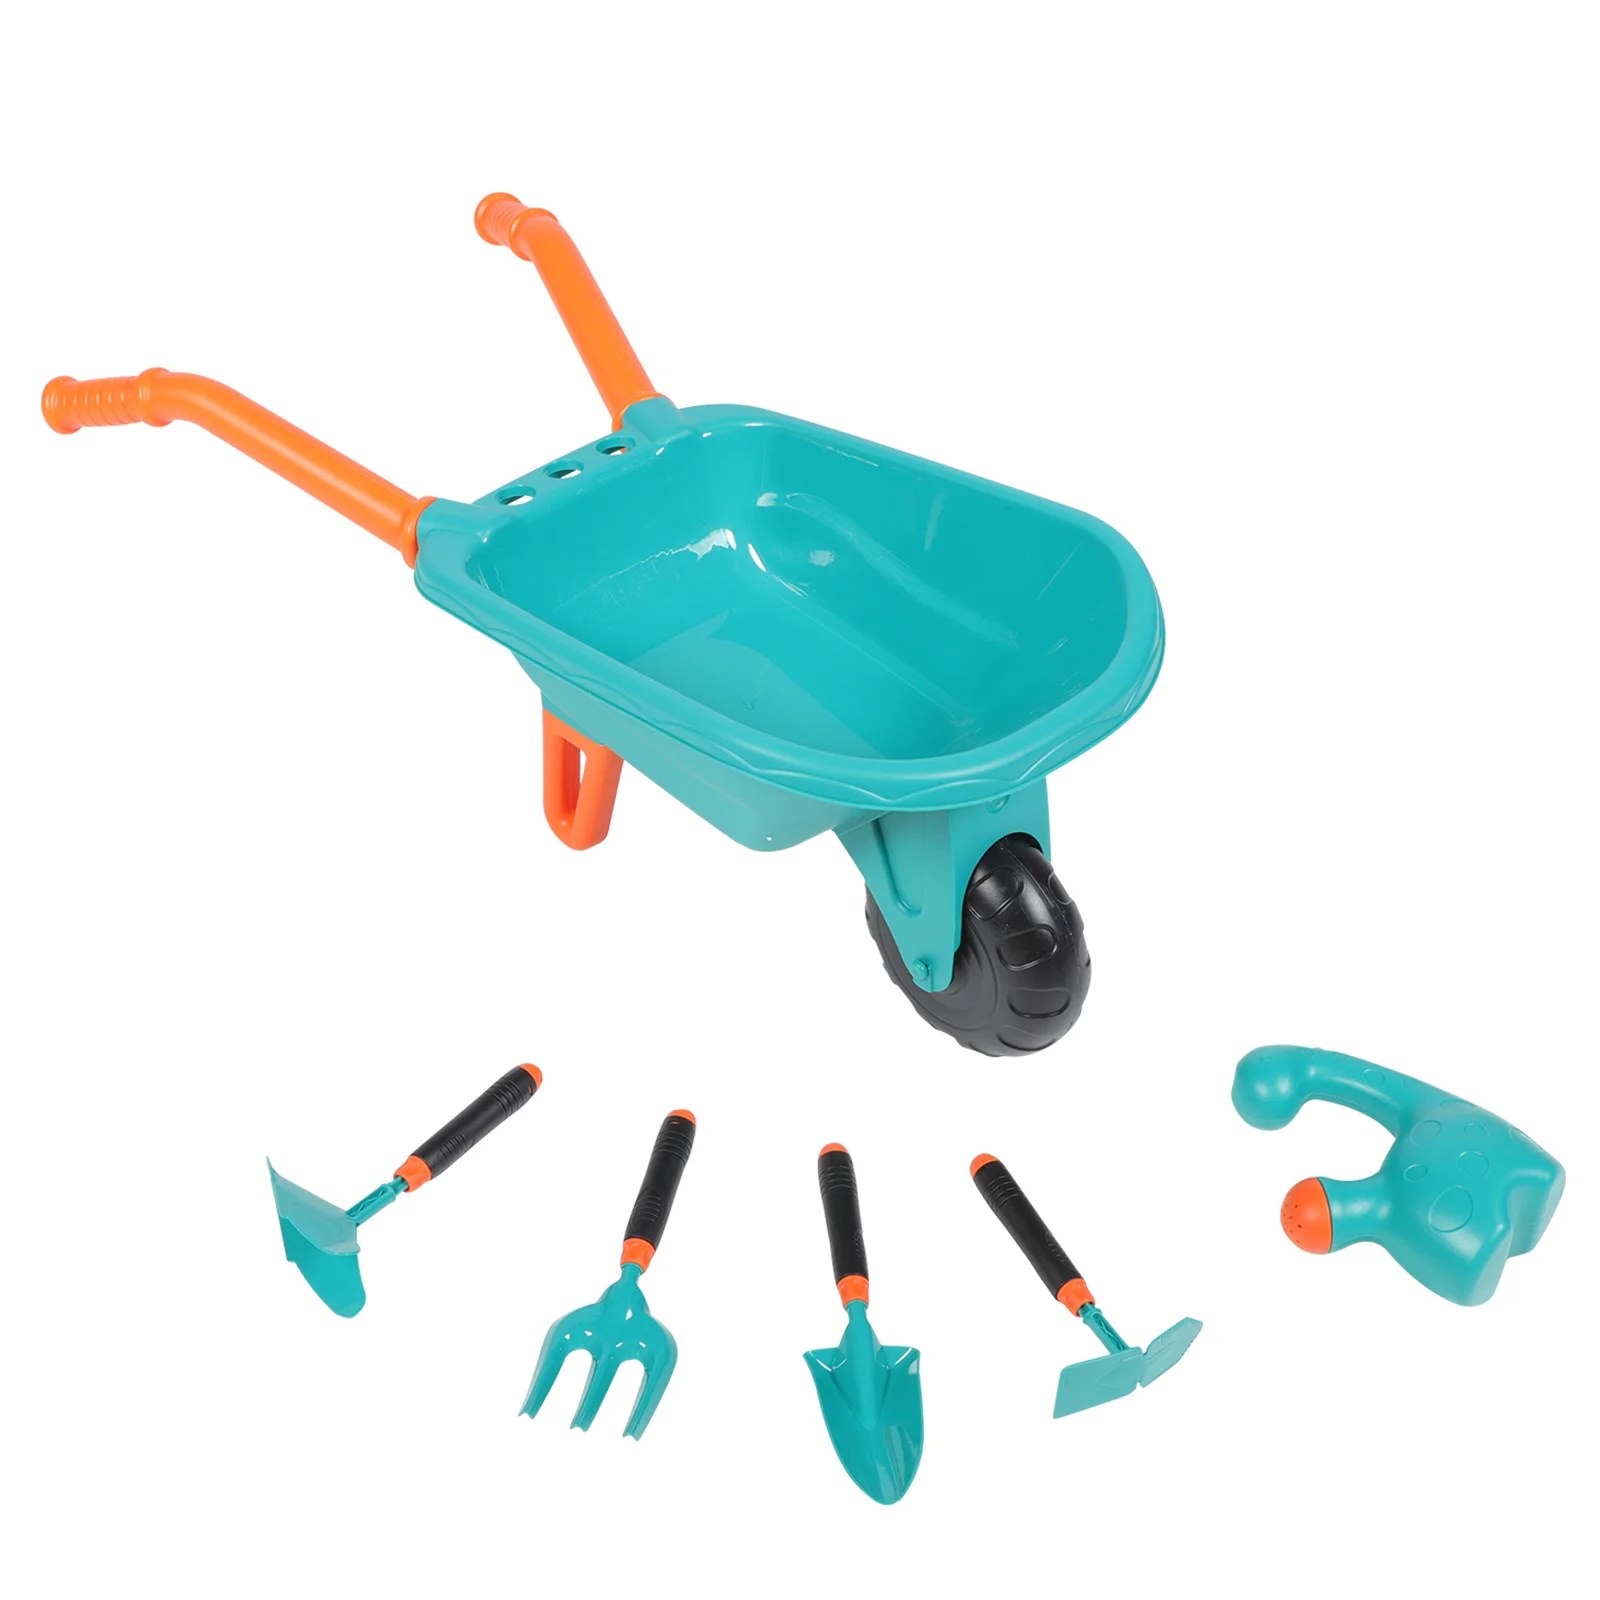 

Children's Toy Set Toys Toddlers Kids Gardening Tools Farming Planting Plastic Handle